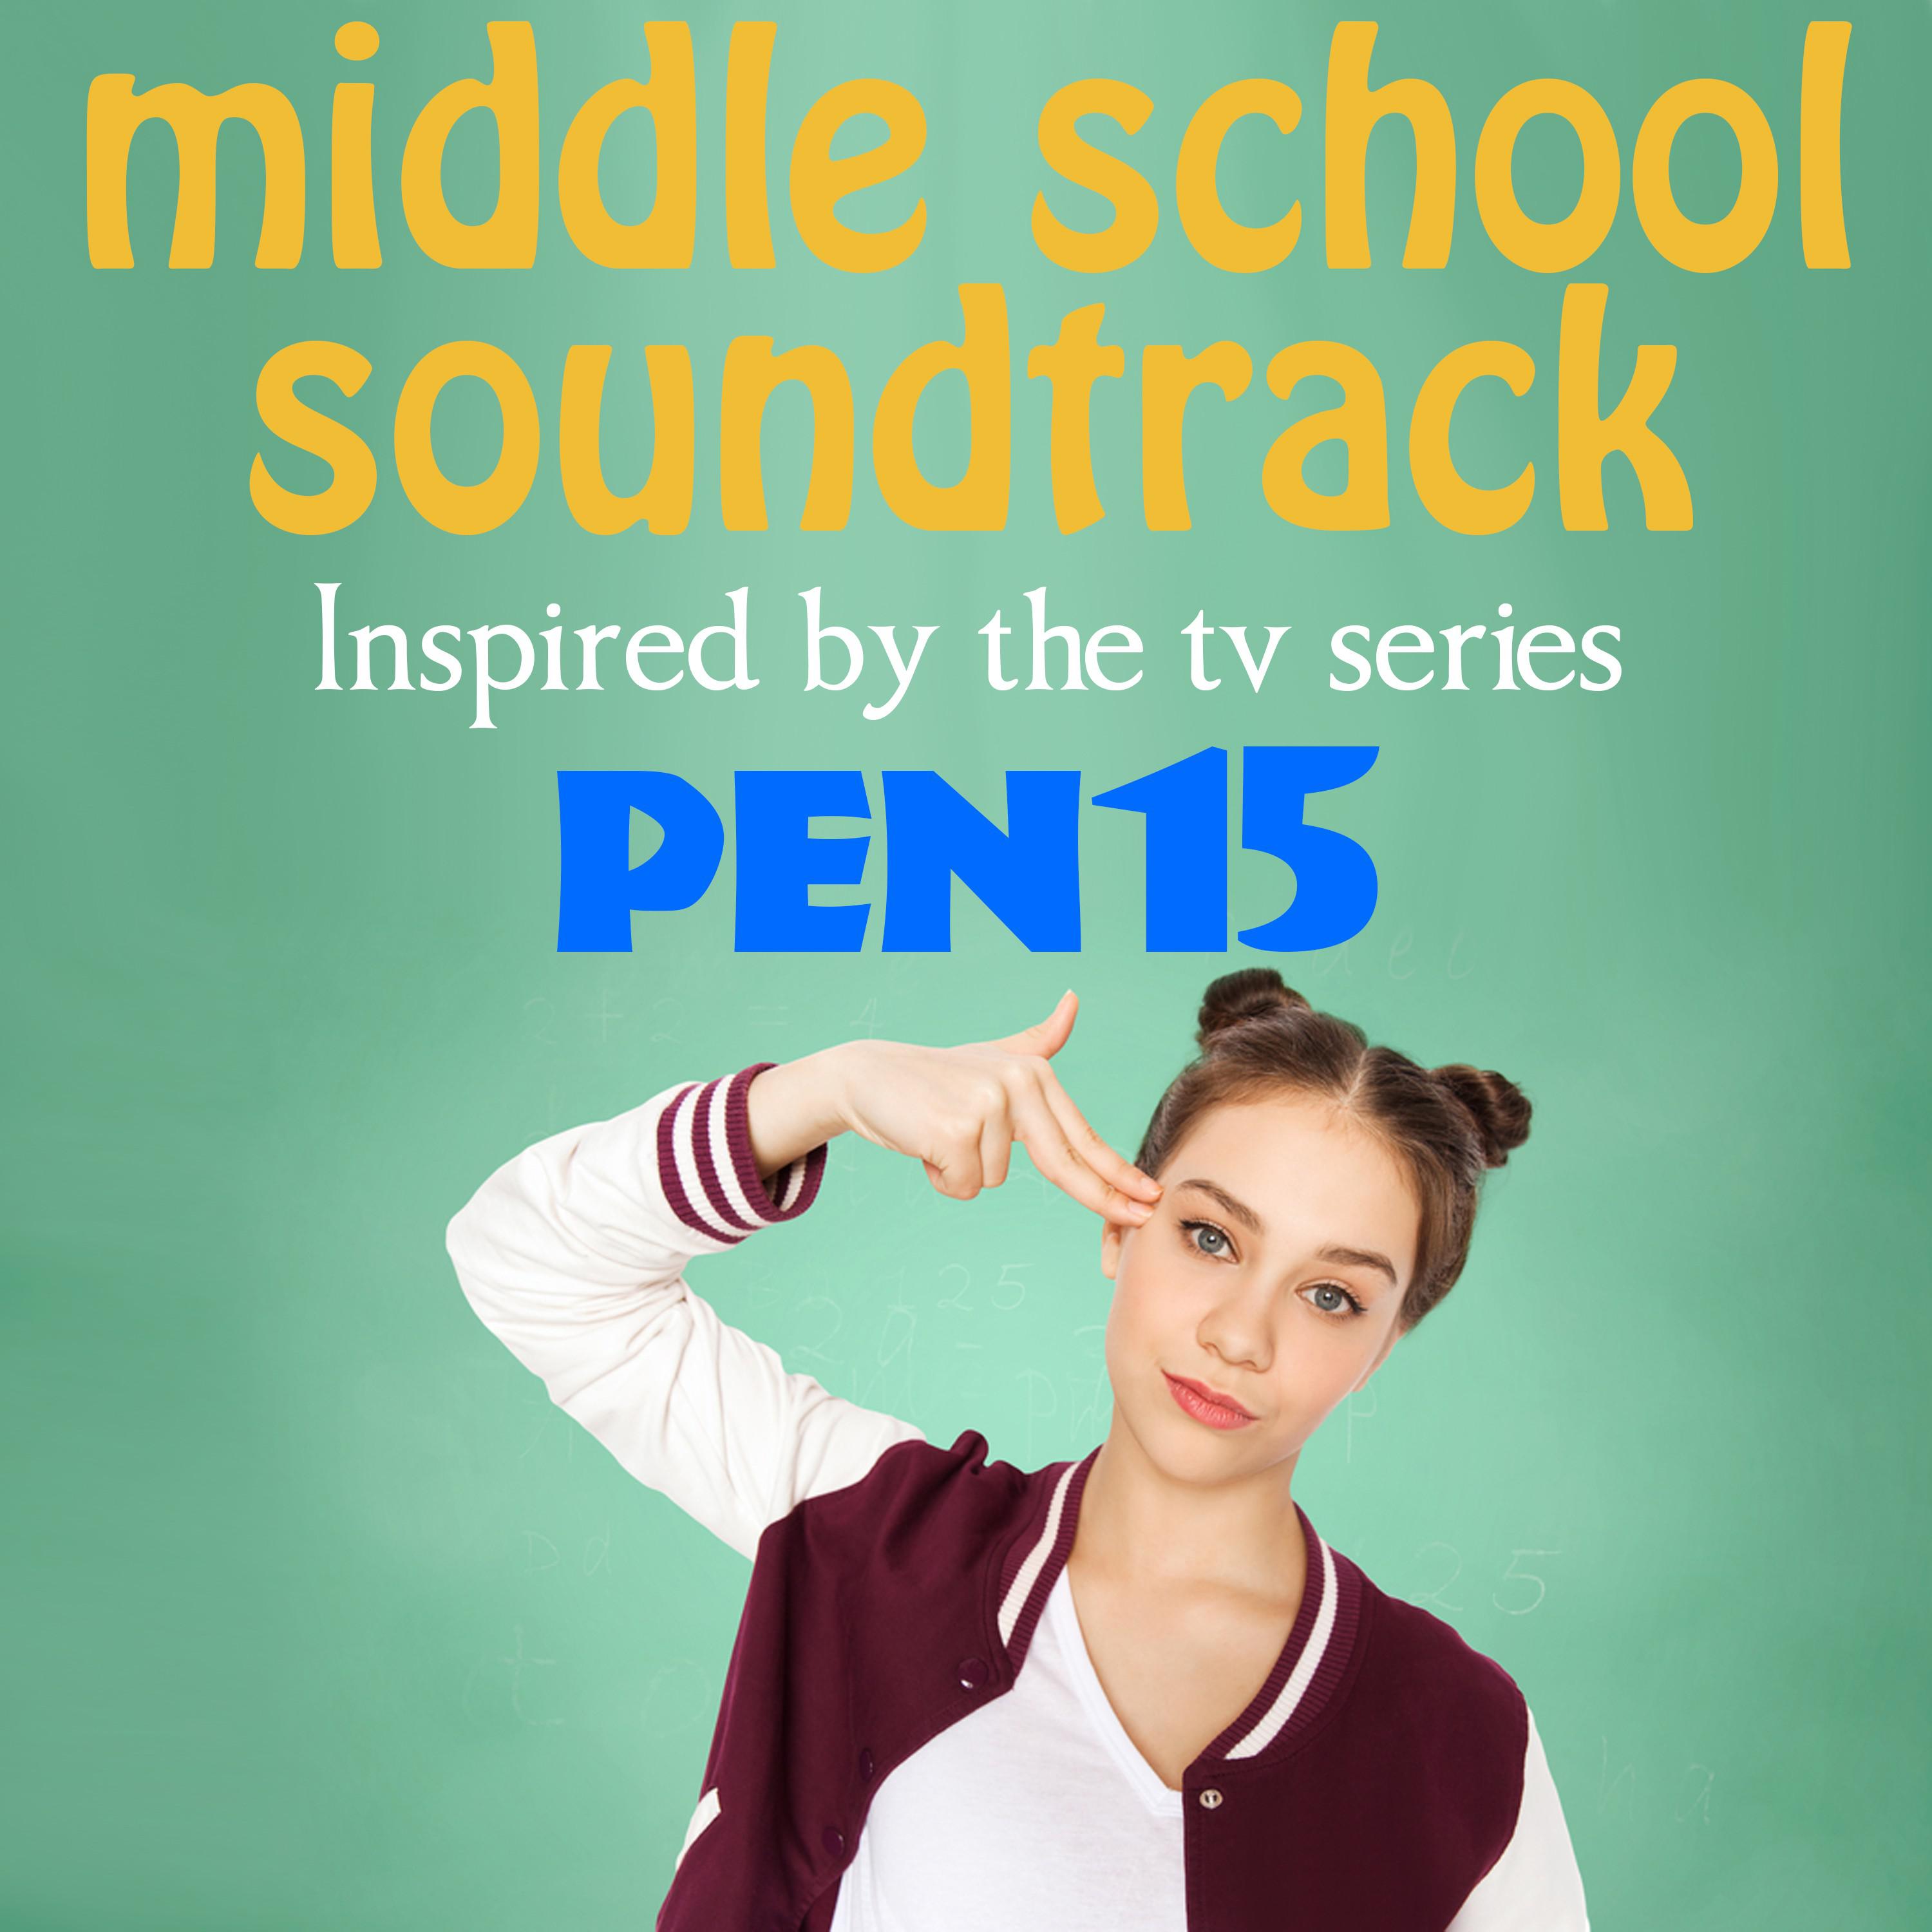 Middle School Soundtrack Inspired by the TV Series Pen15